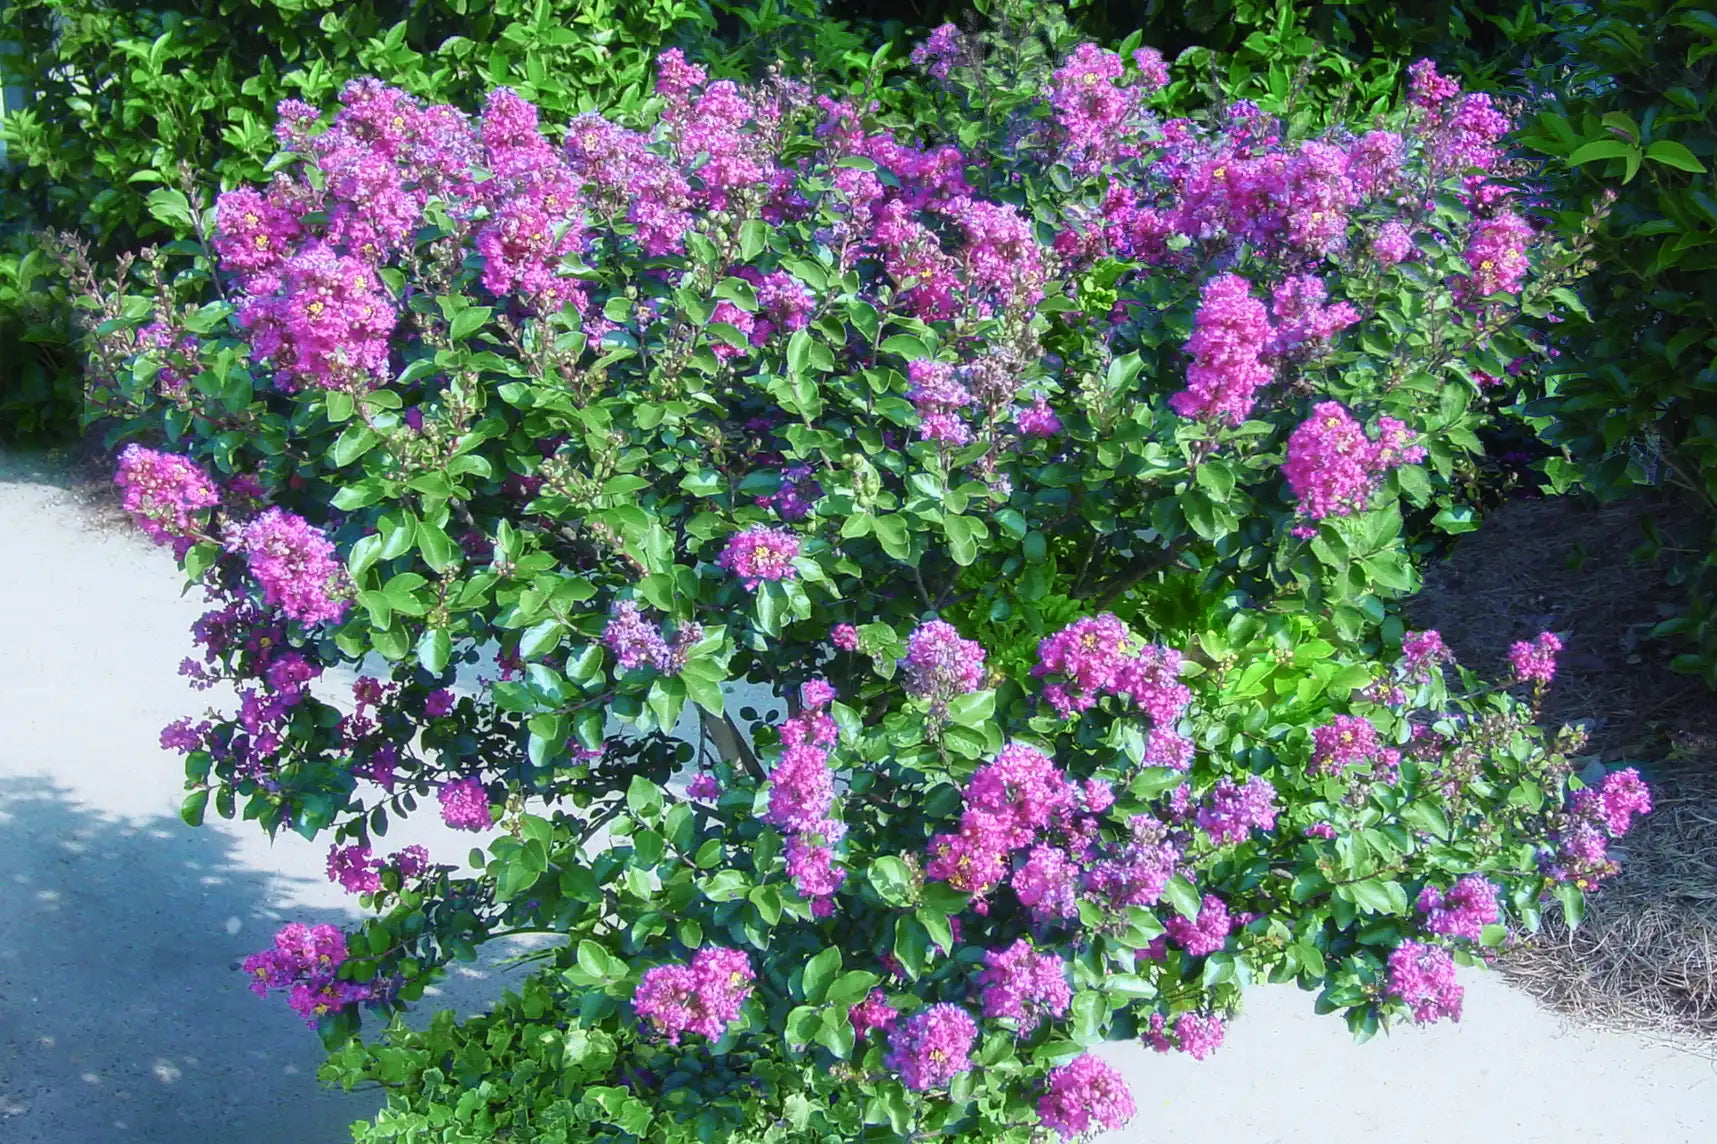 A Purple Cow® Crepe Myrtle is in full bloom with an abundance of deep purple flowers amid its healthy green foliage.